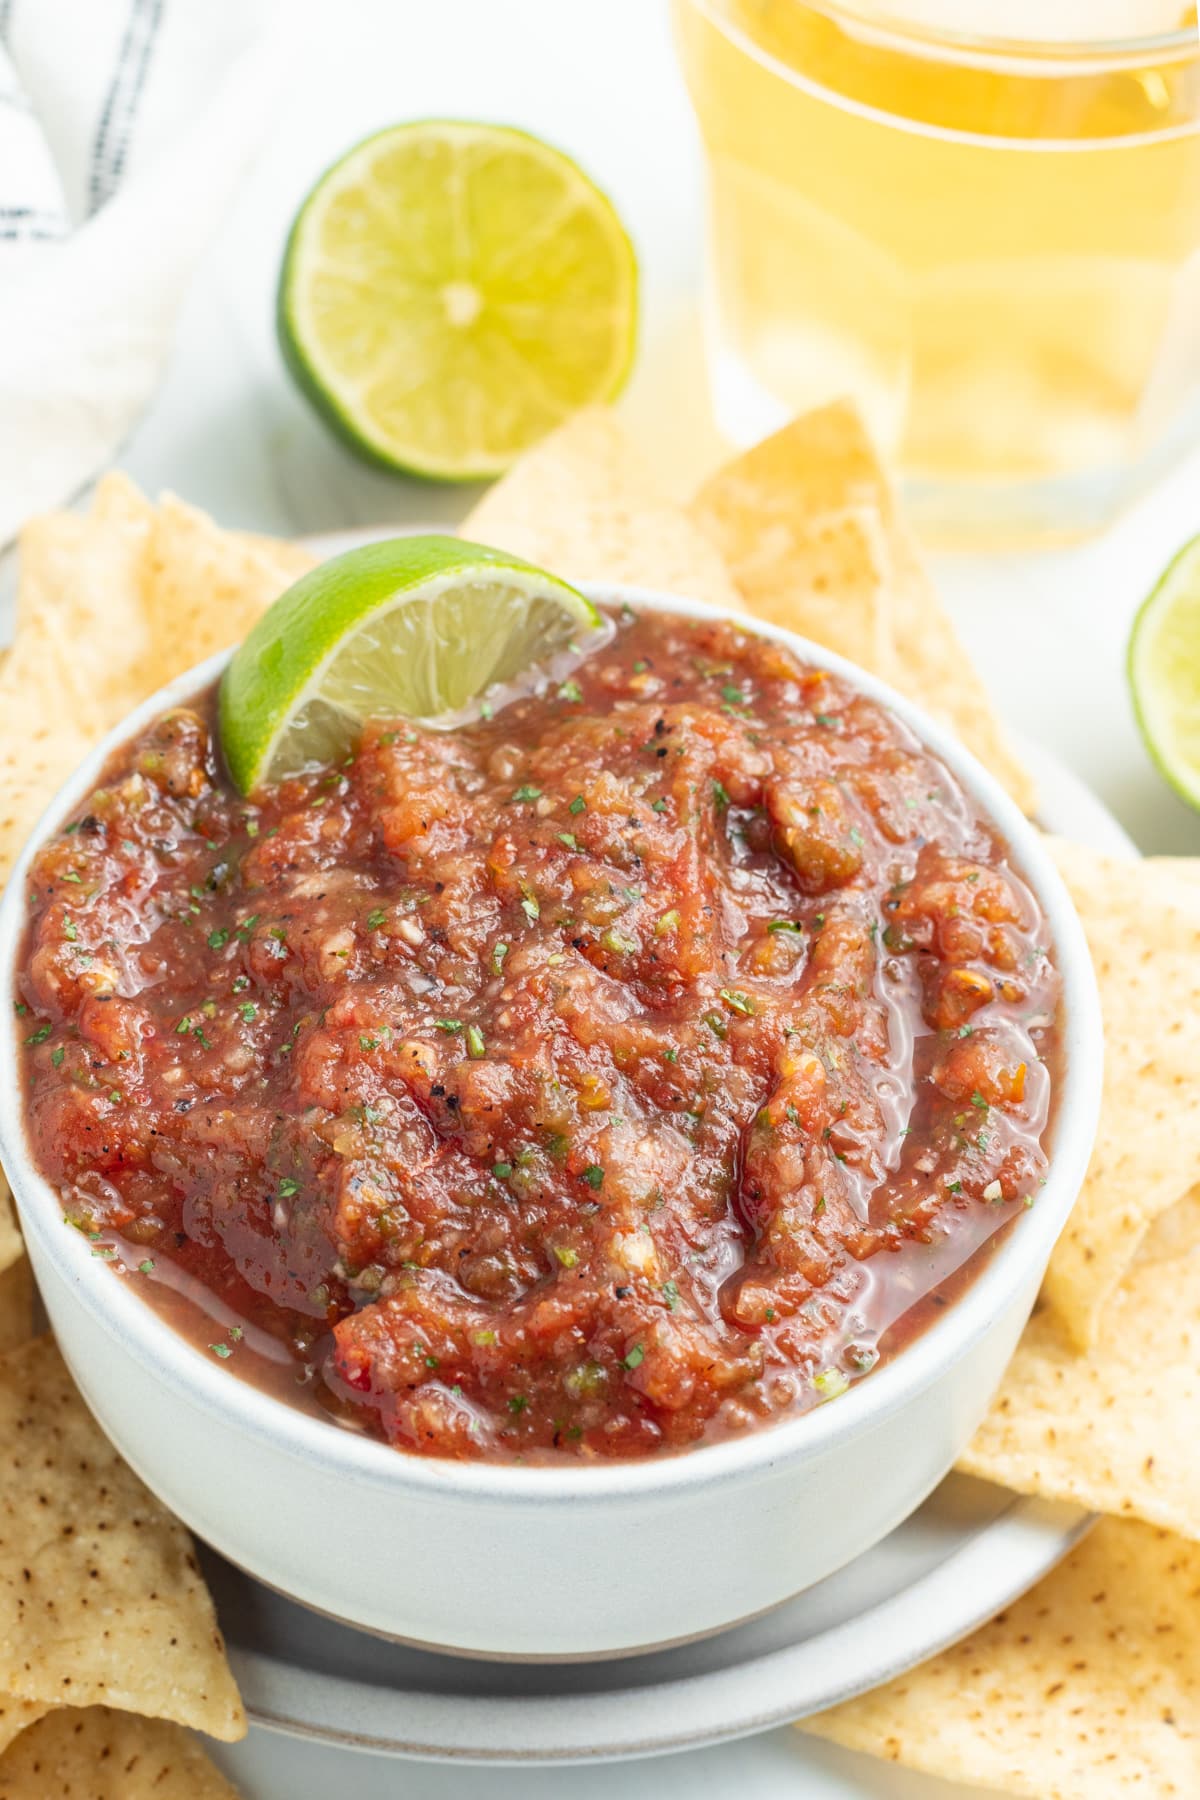 Picture of restaurant style salsa close-up in a bowl.